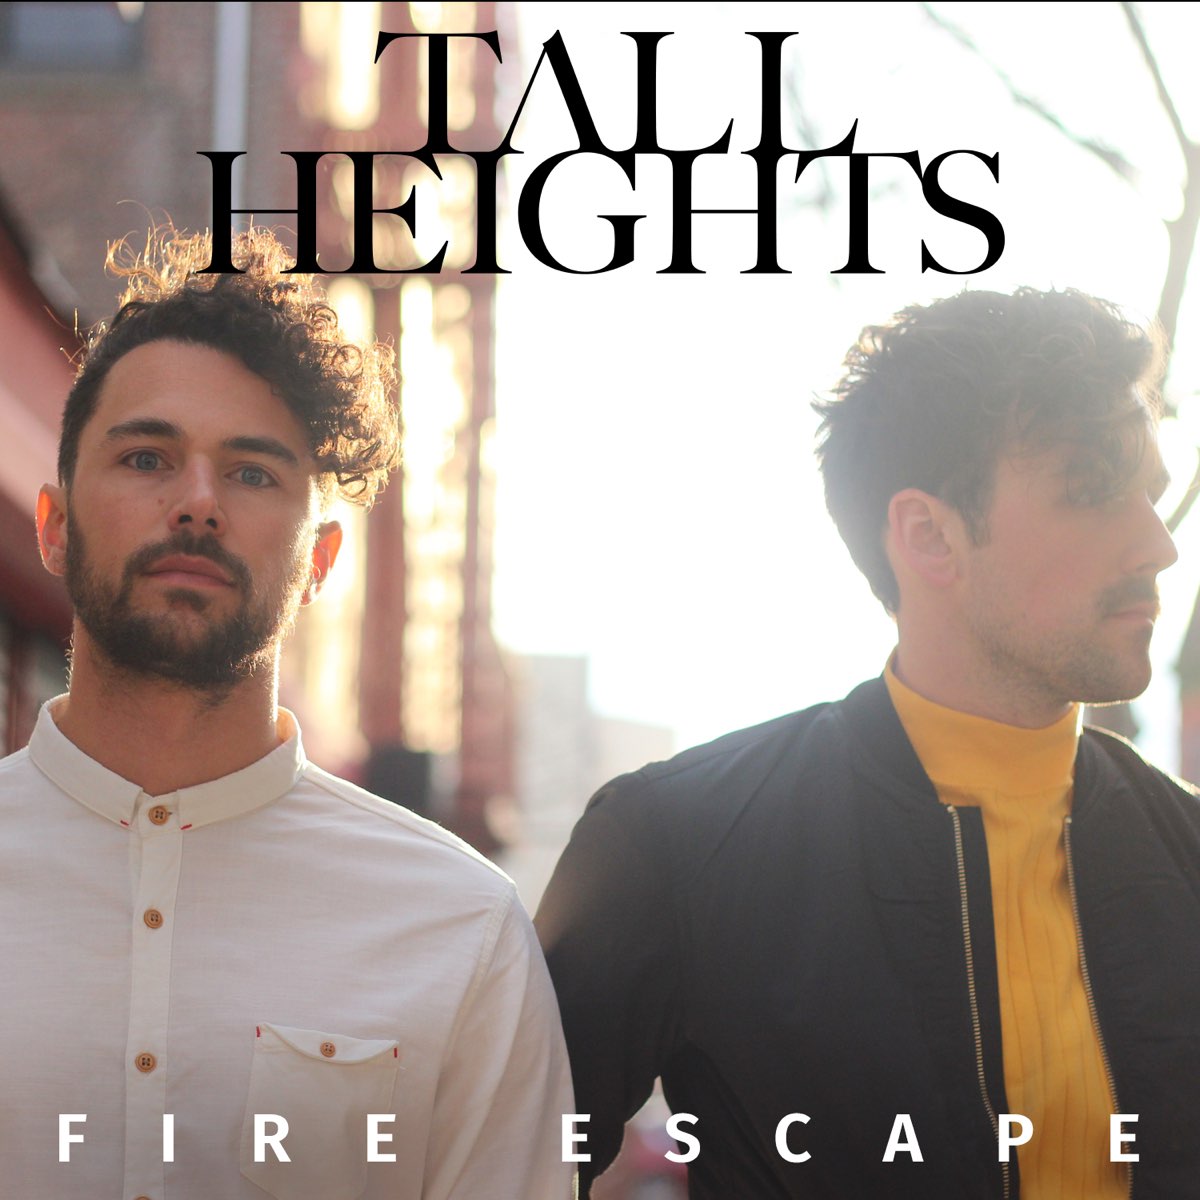 Tall height. Eloy- Escape to the heights.